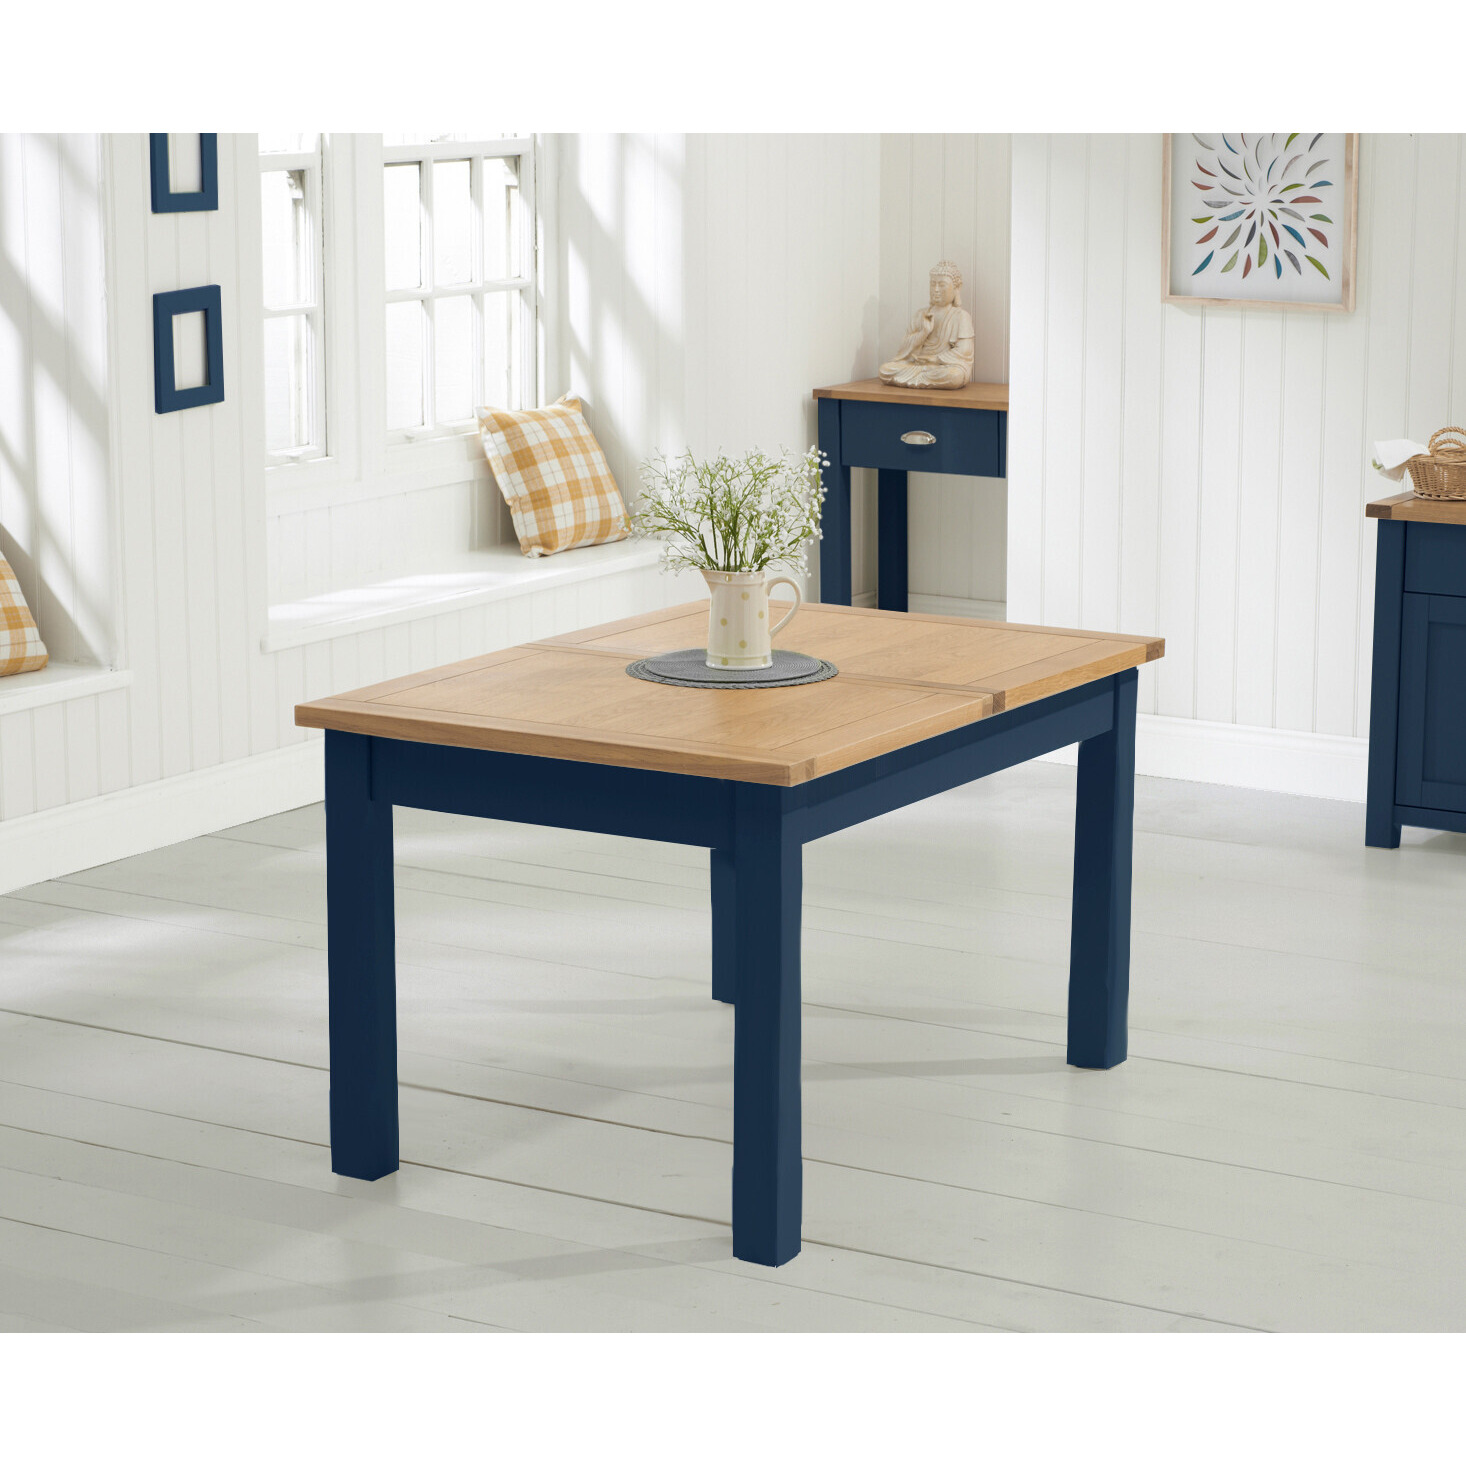 Somerset 130cm Oak and Blue Painted Extending Dining Table